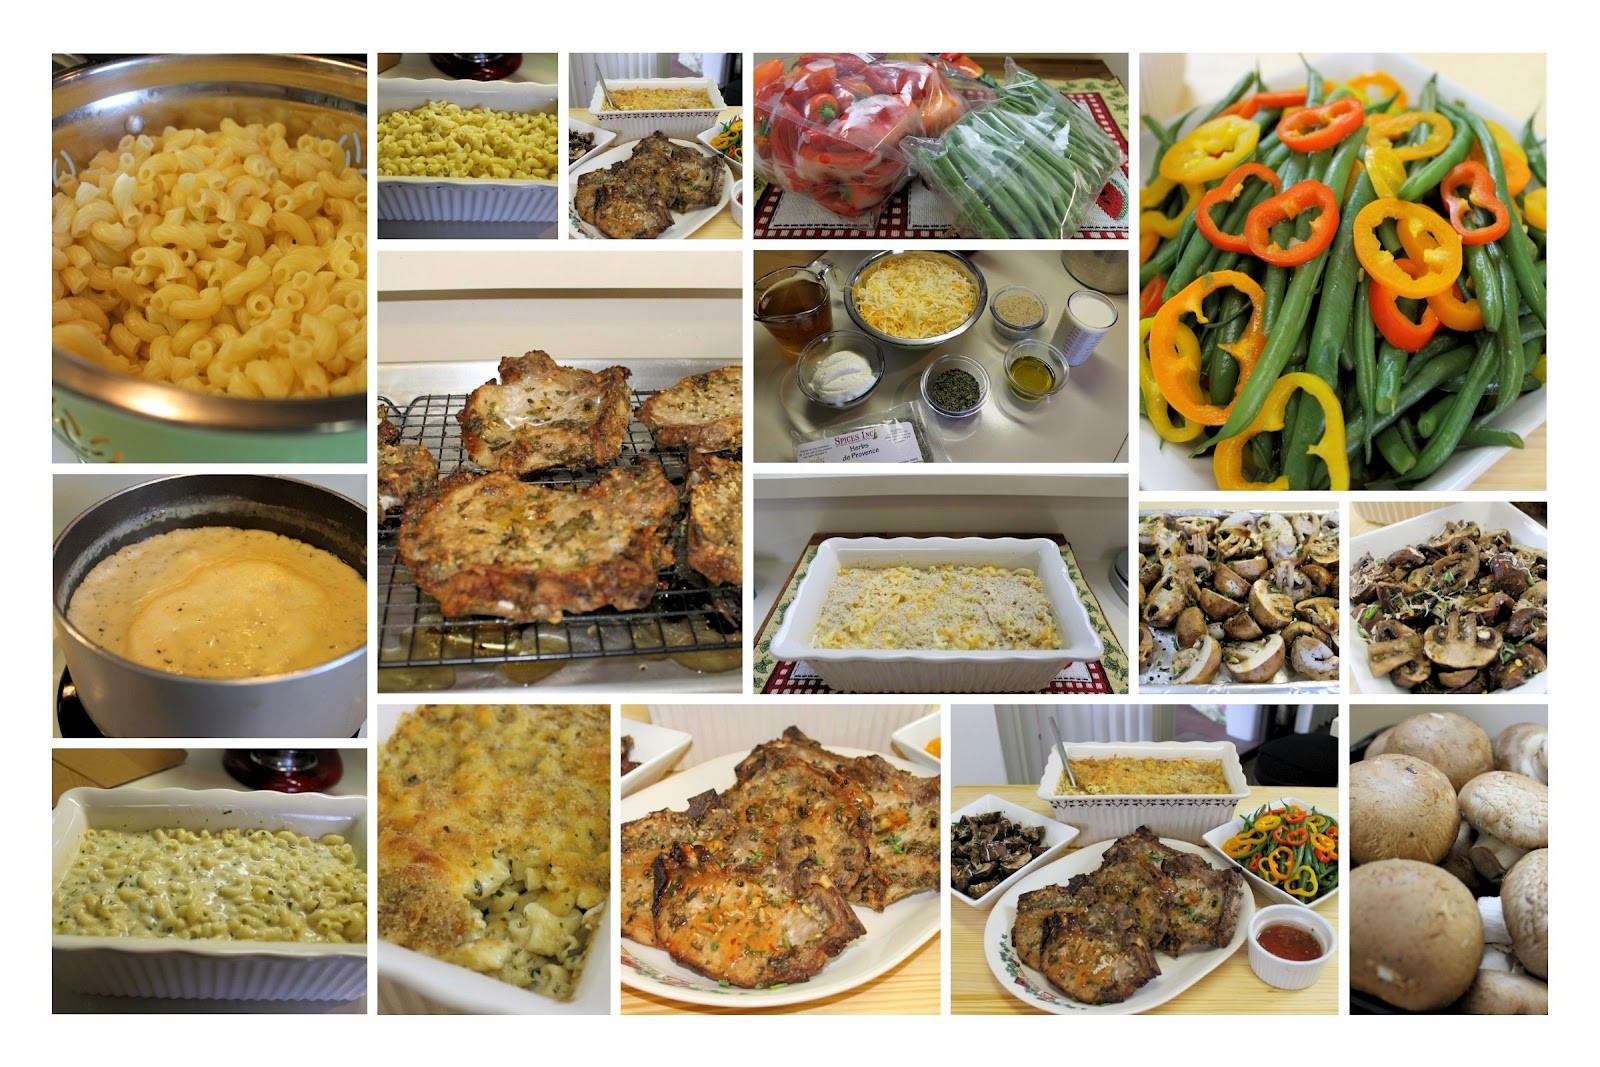 Soulfood Dinner Ideas
 CW s Cafe Today From Pantry To Table Sunday Dinner